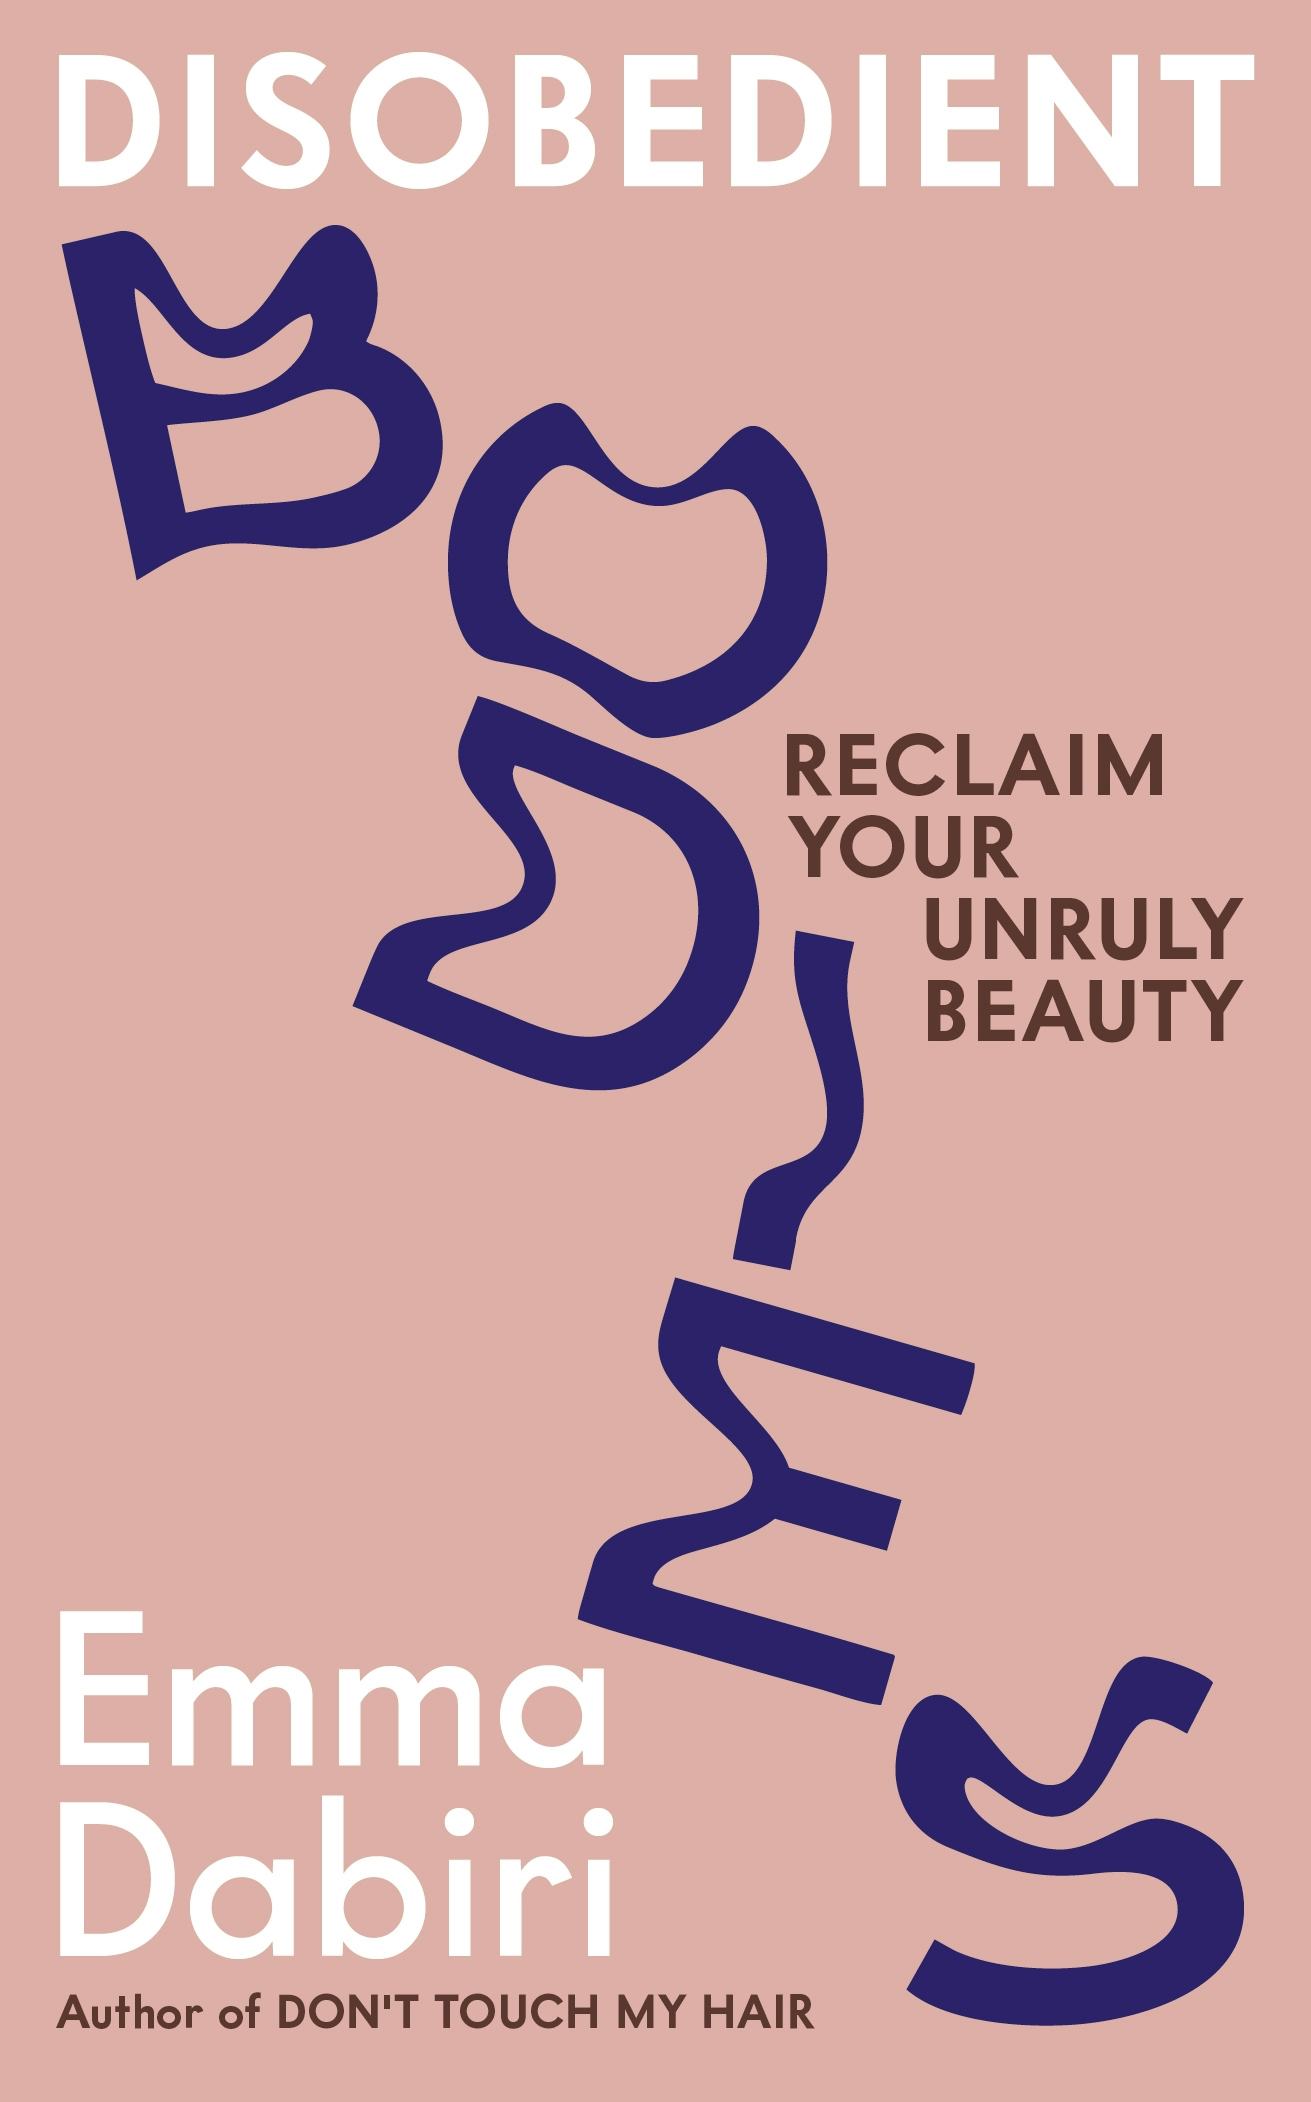 Front cover of 'Disobedient Bodies' by Emma Dabiri